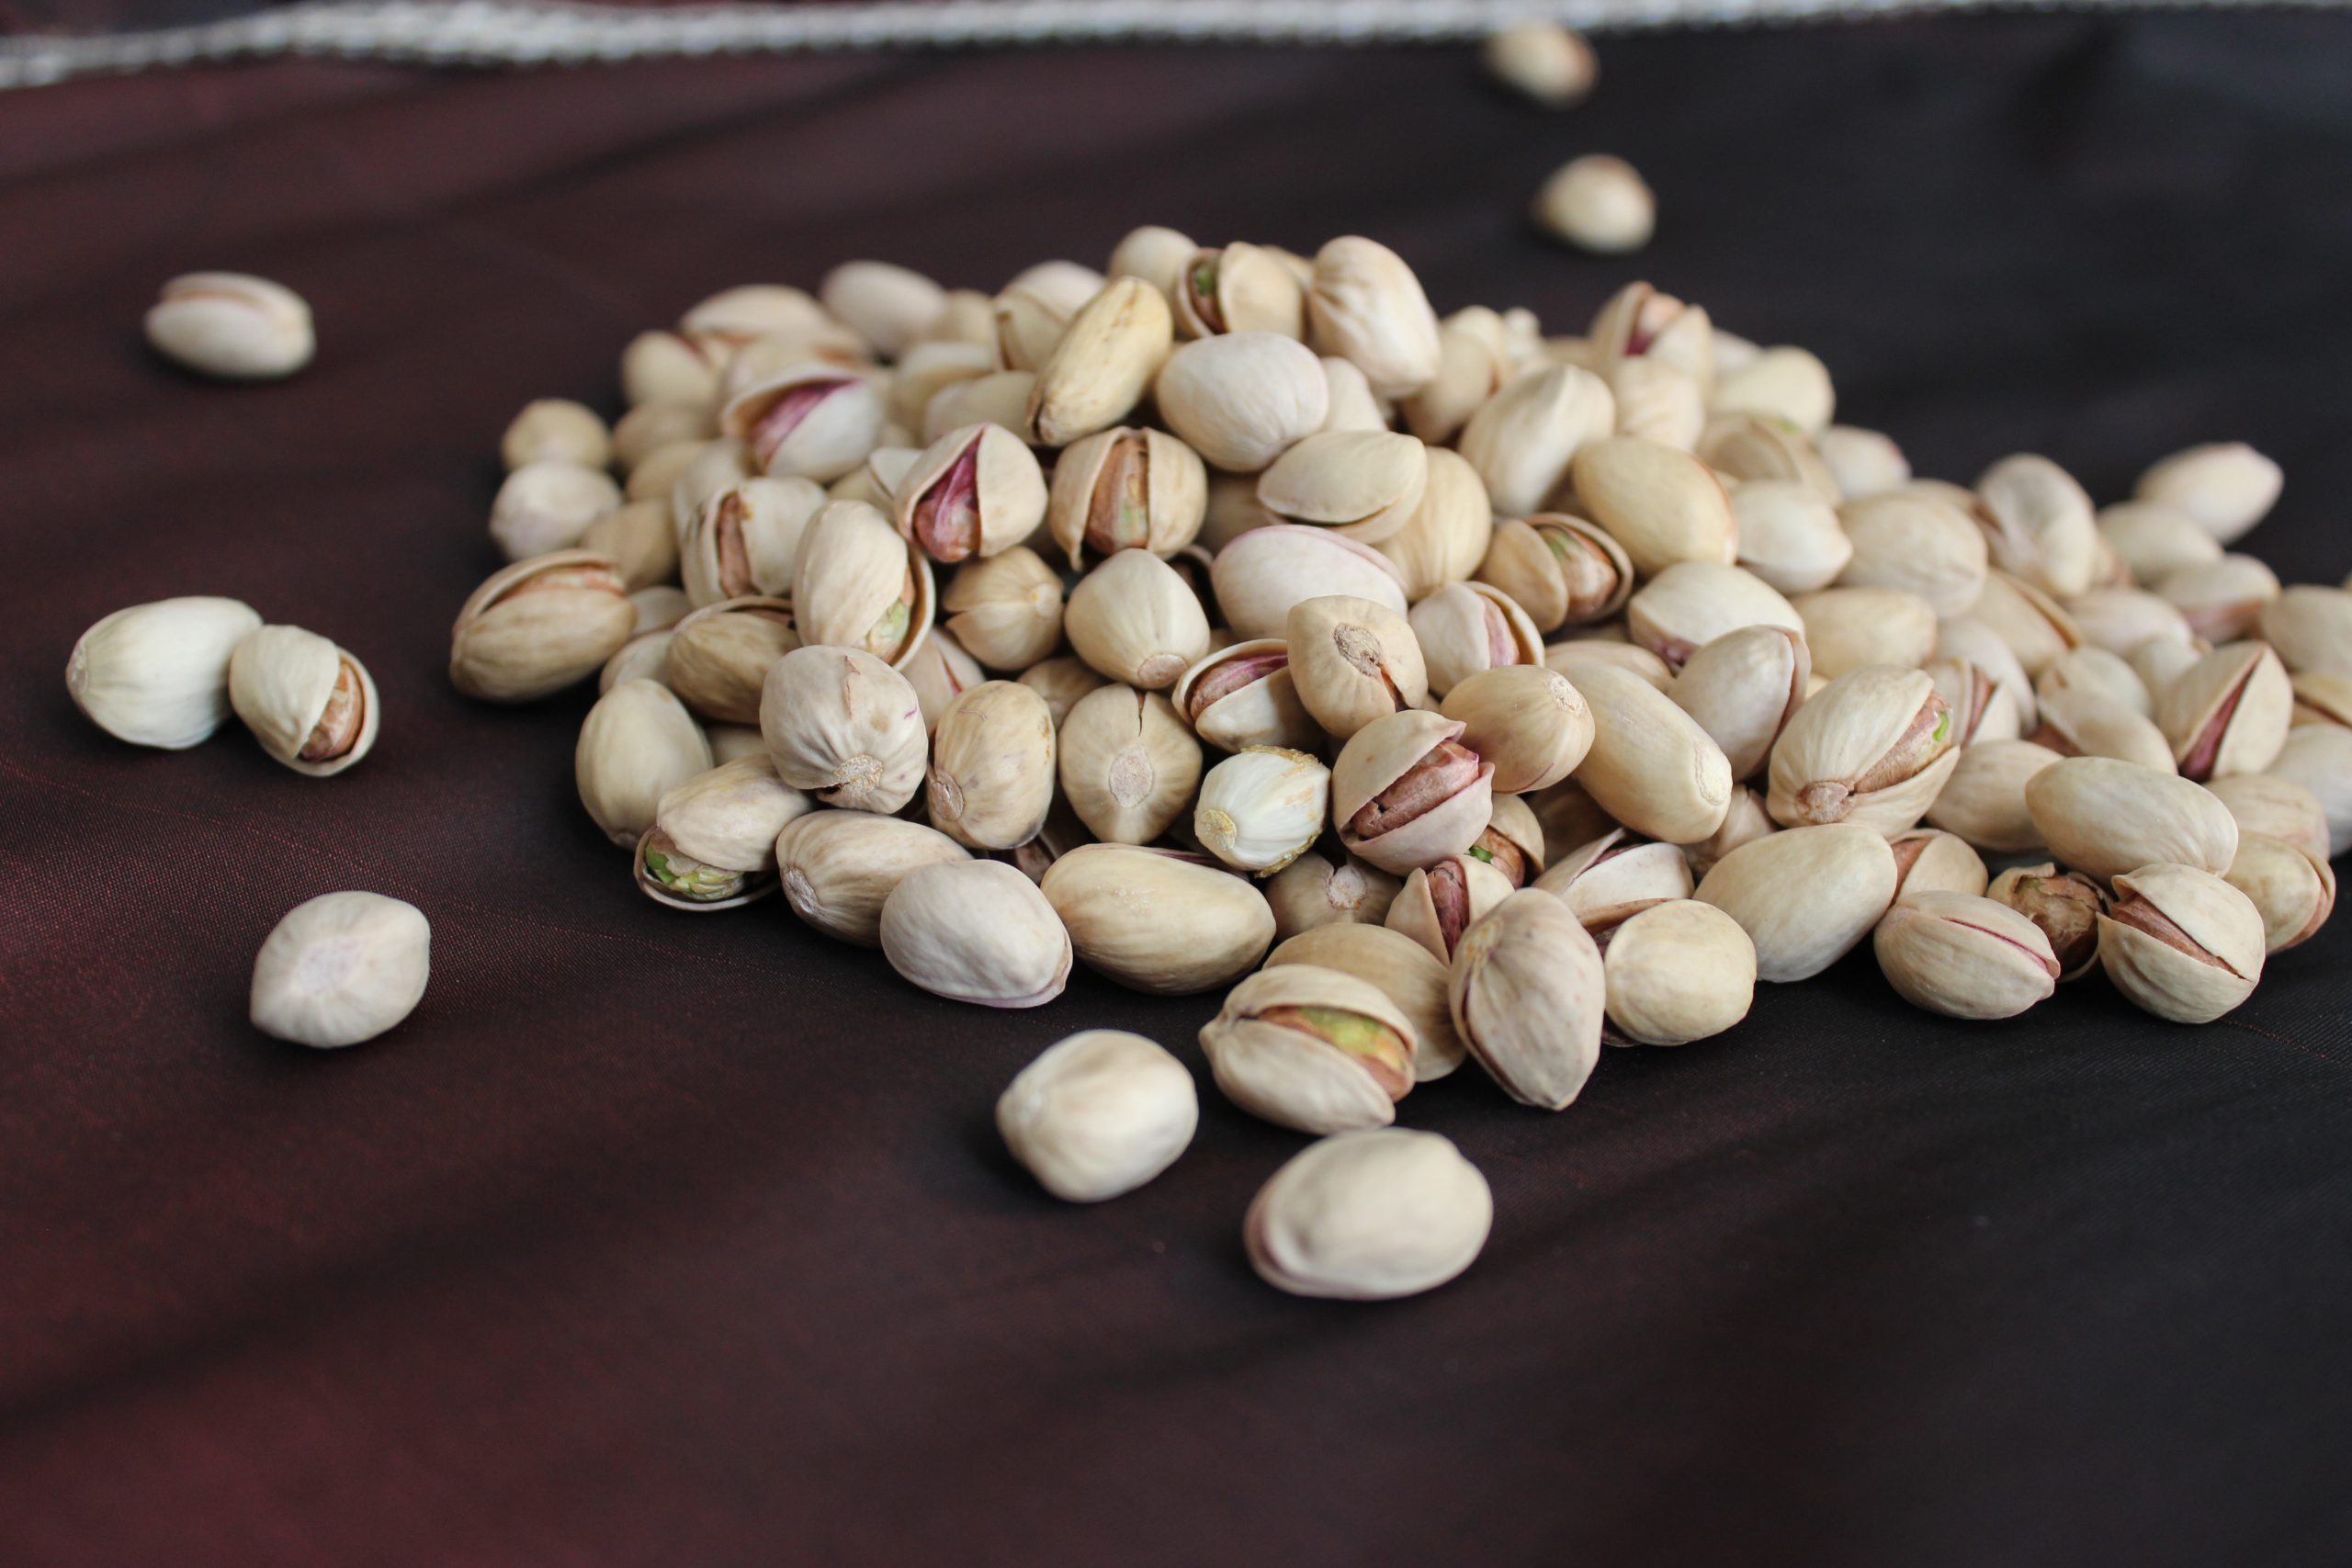  Special Sale of Fandoghi Pistachios in China |Iranian Nuts Exporters